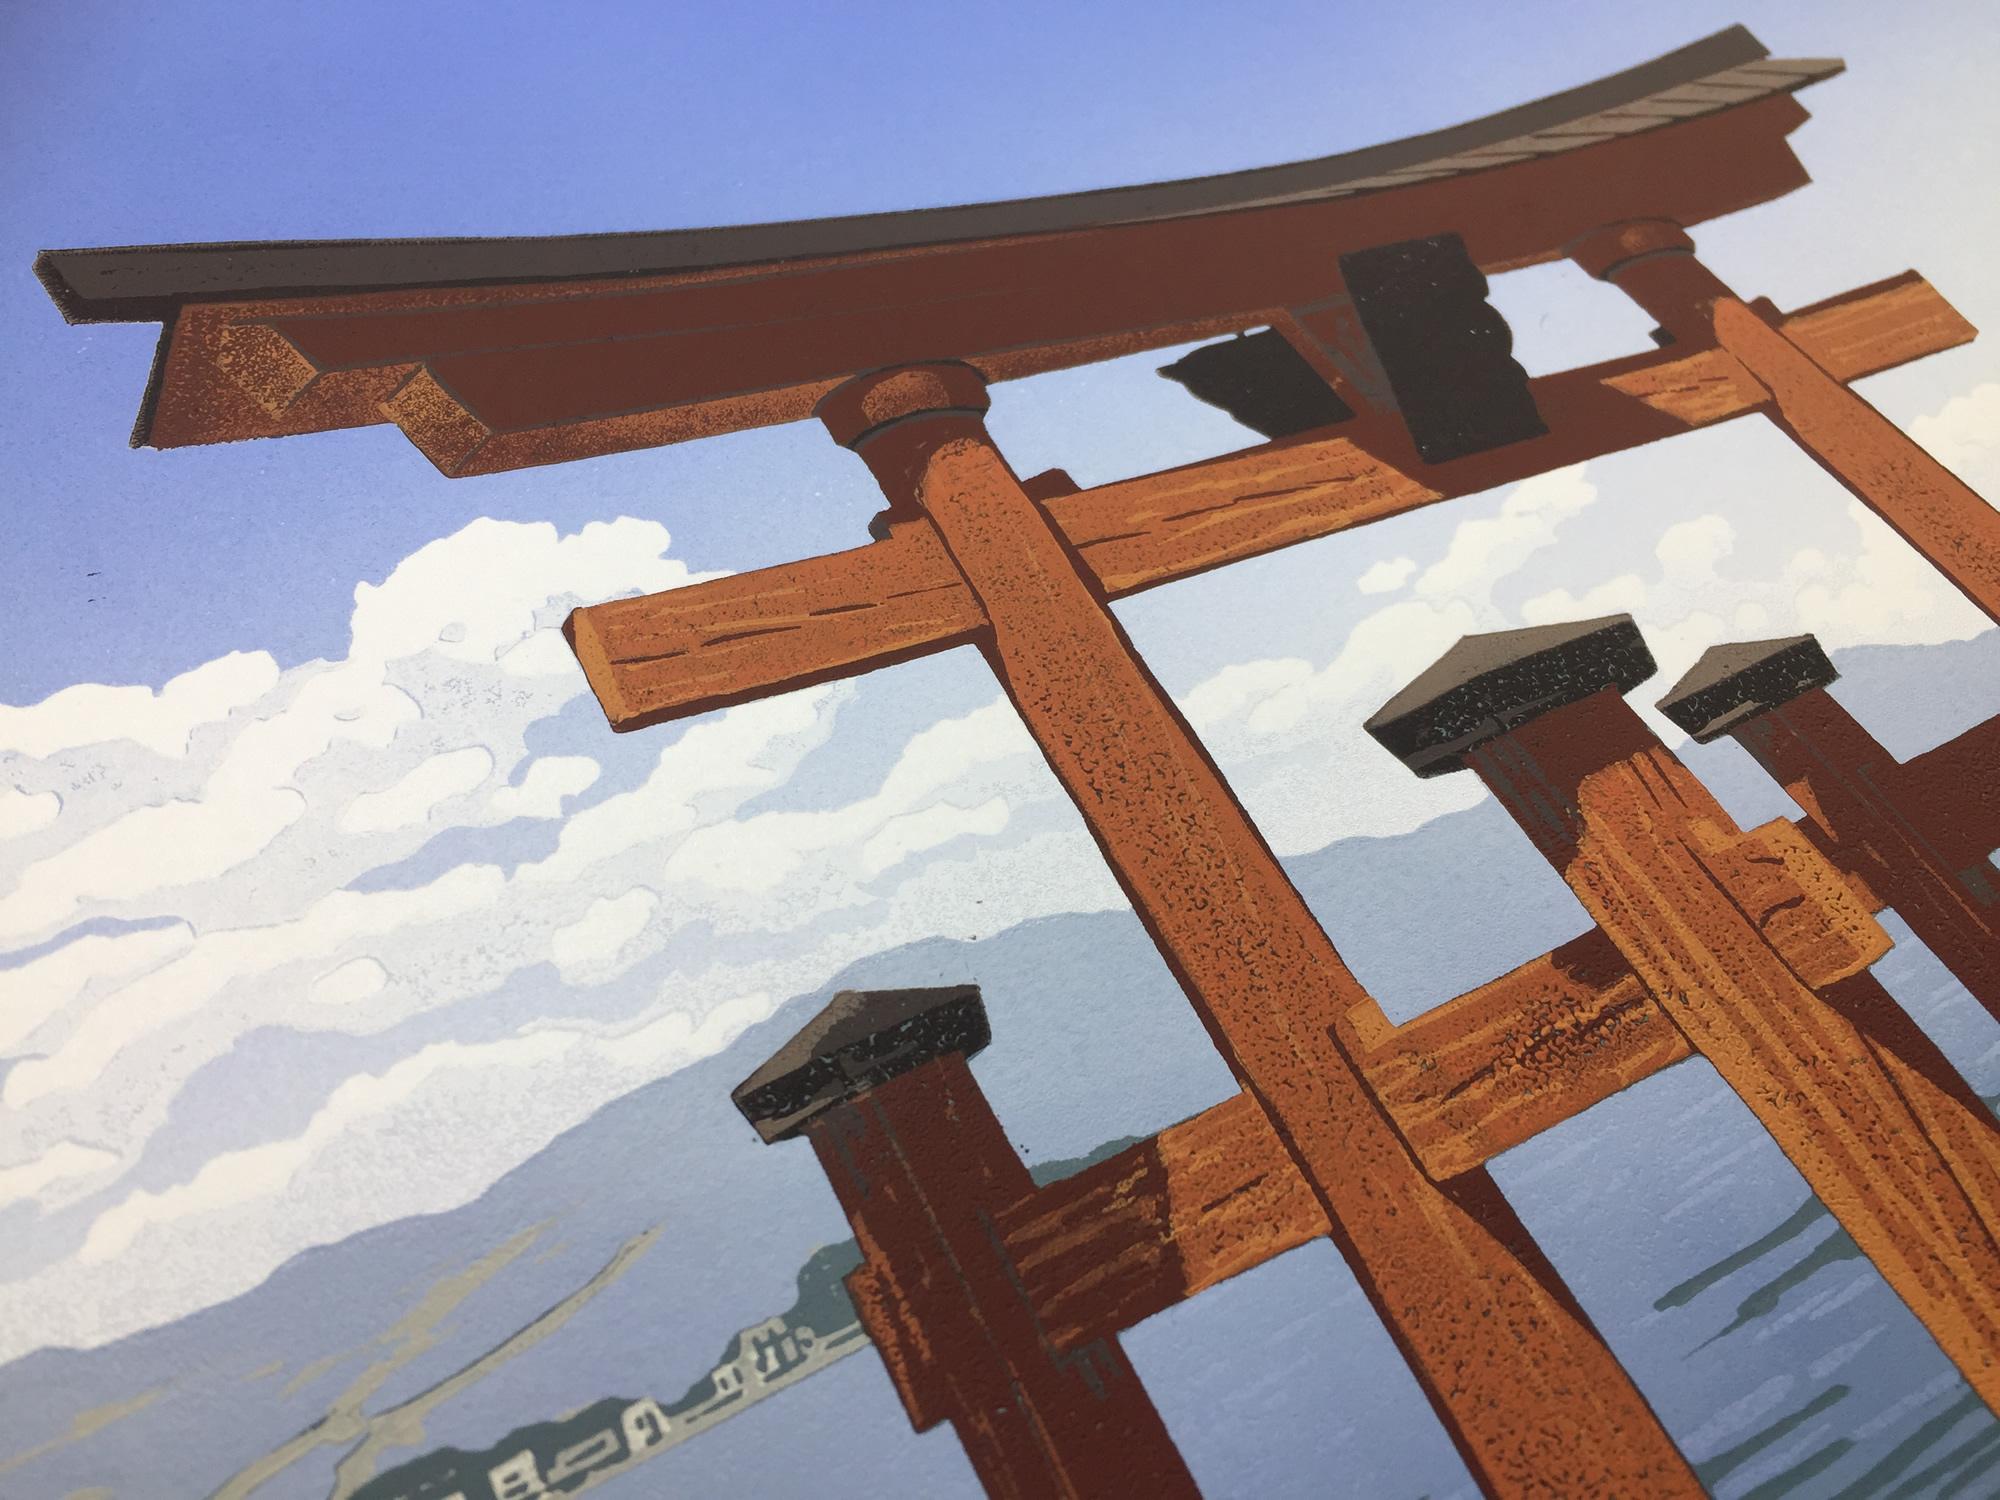 Torii Sea View by Alexandra Buckle
Limited Edition Linocut on Paper
Edition of 12
Image size: 30 cm x 40 cm x 0 cm
Sheet Size: 37 cm x 47 cm x 0.1 cm
Sold Unframed
Please note than insitu images are purely an indication of how a piece may